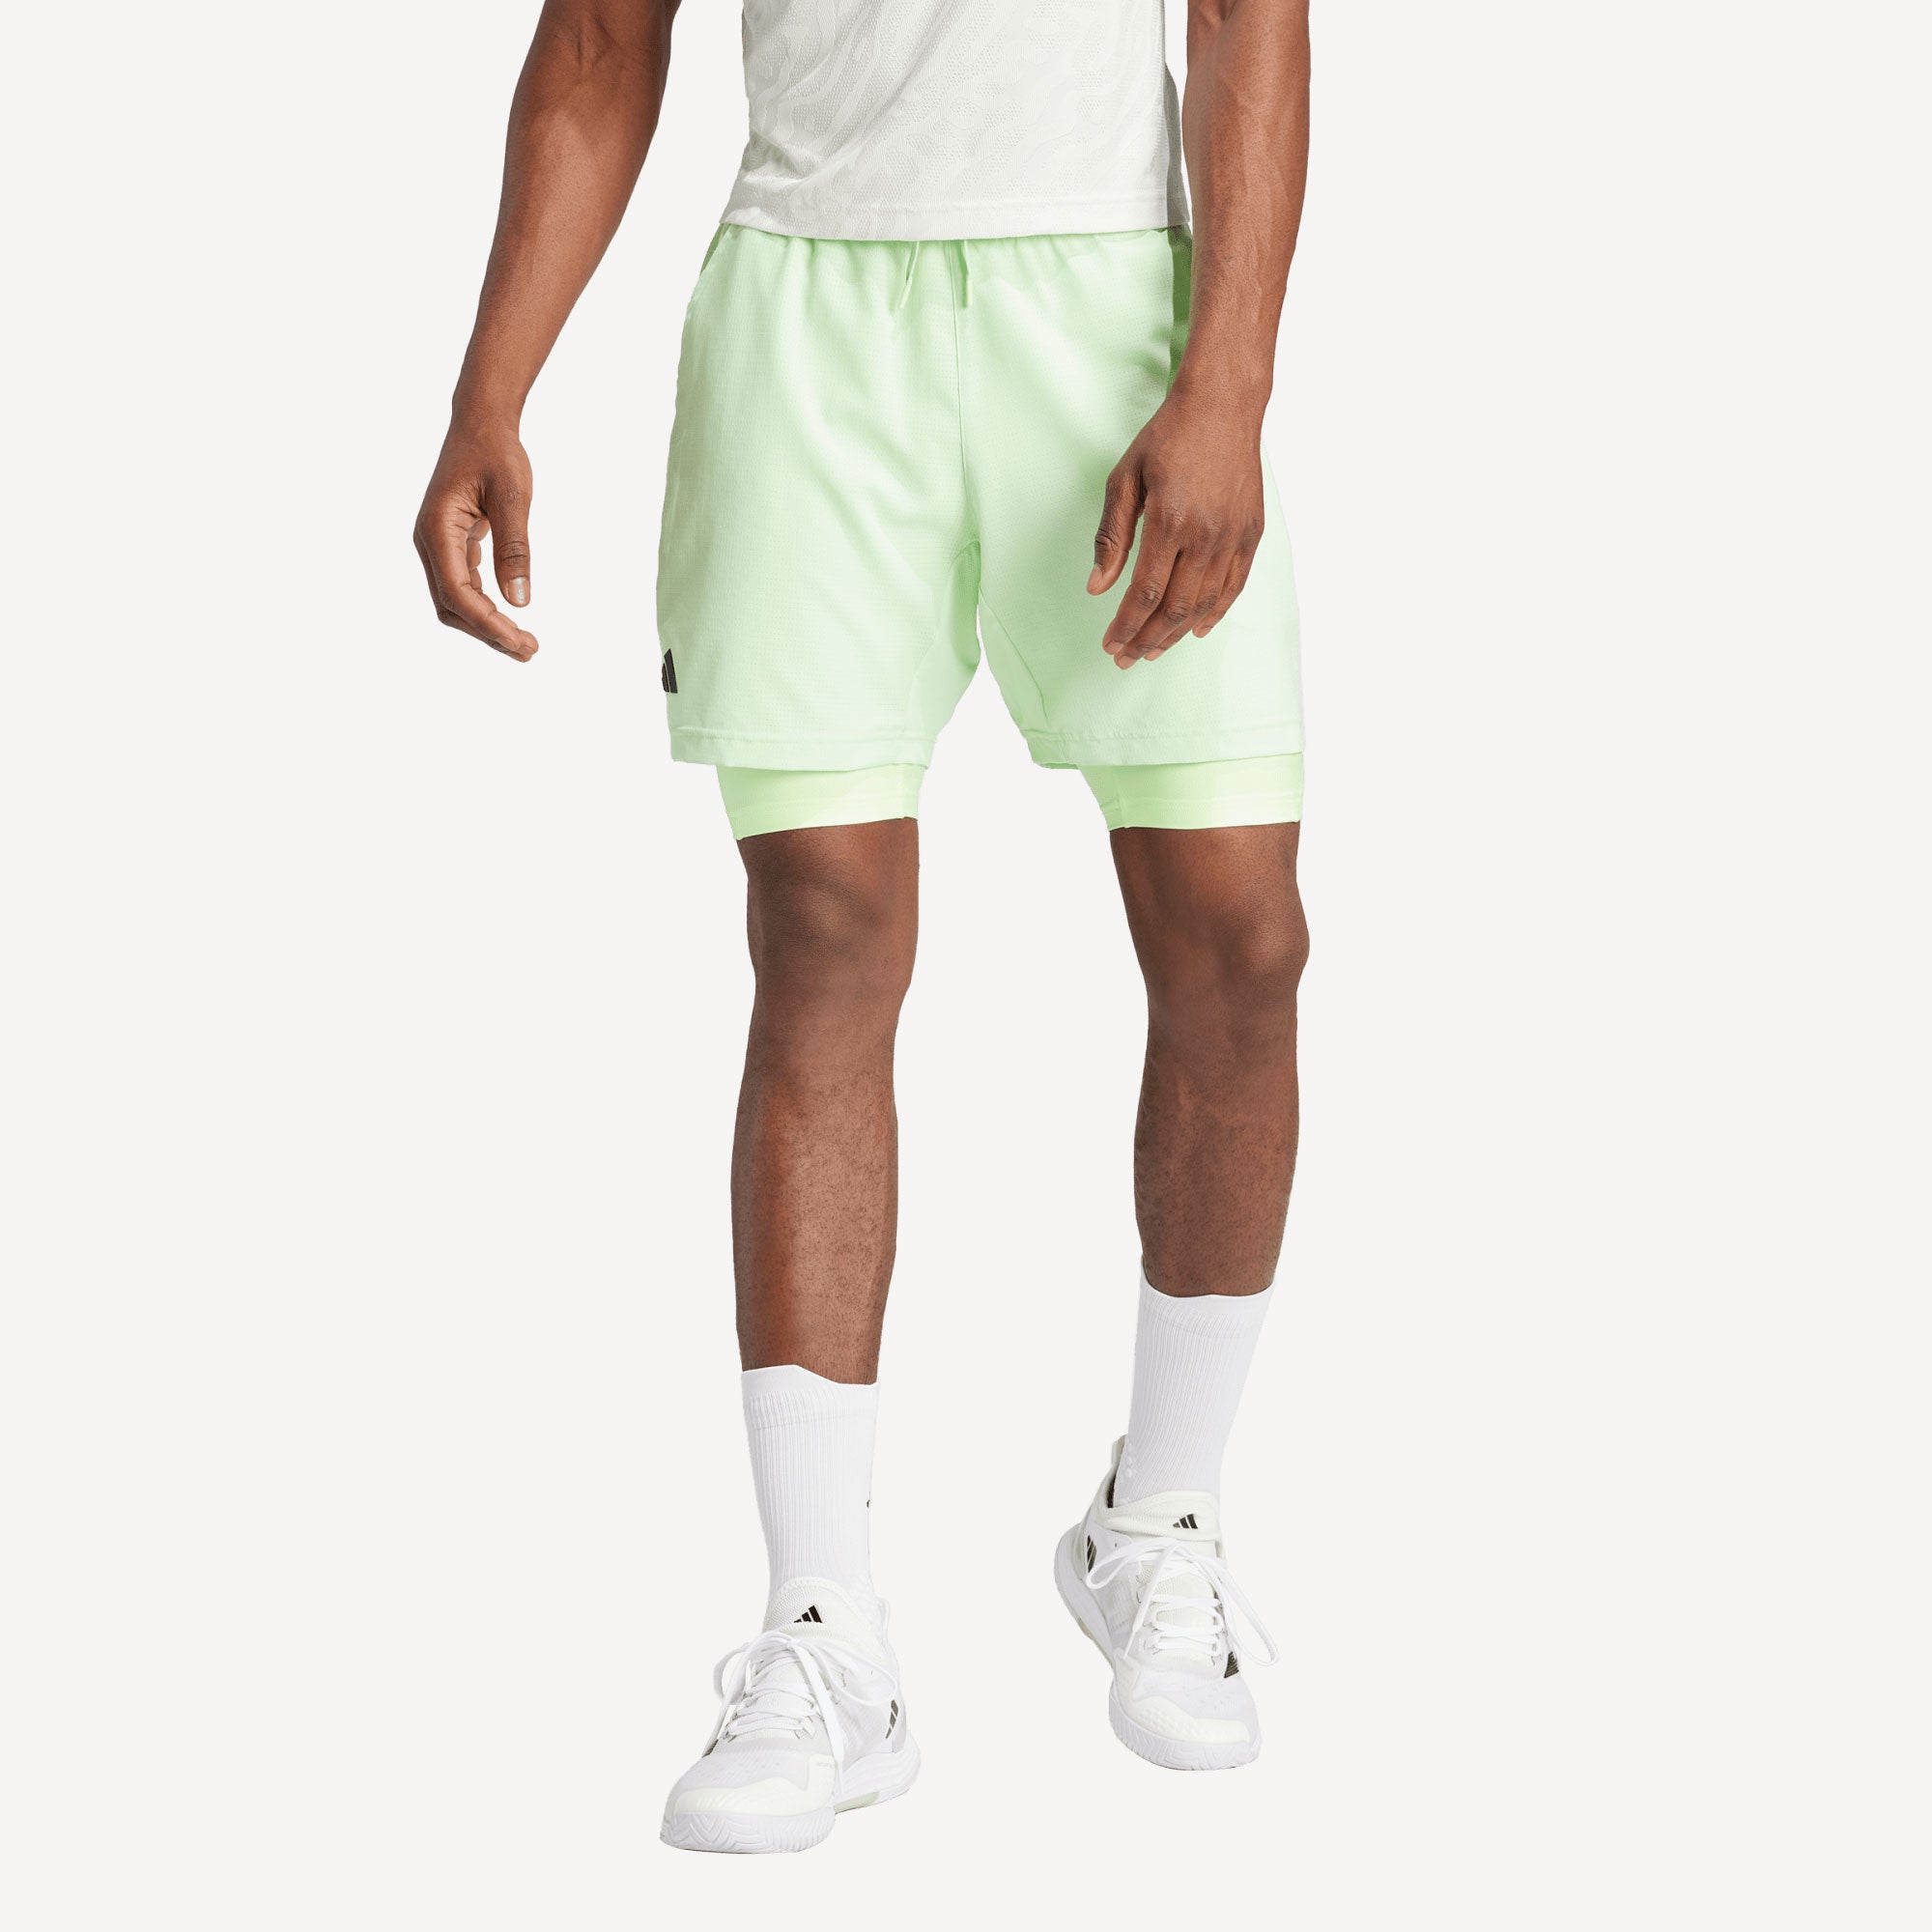 adidas Pro Melbourne Men's Tennis Shorts and Inner Shorts Set - Green (1)